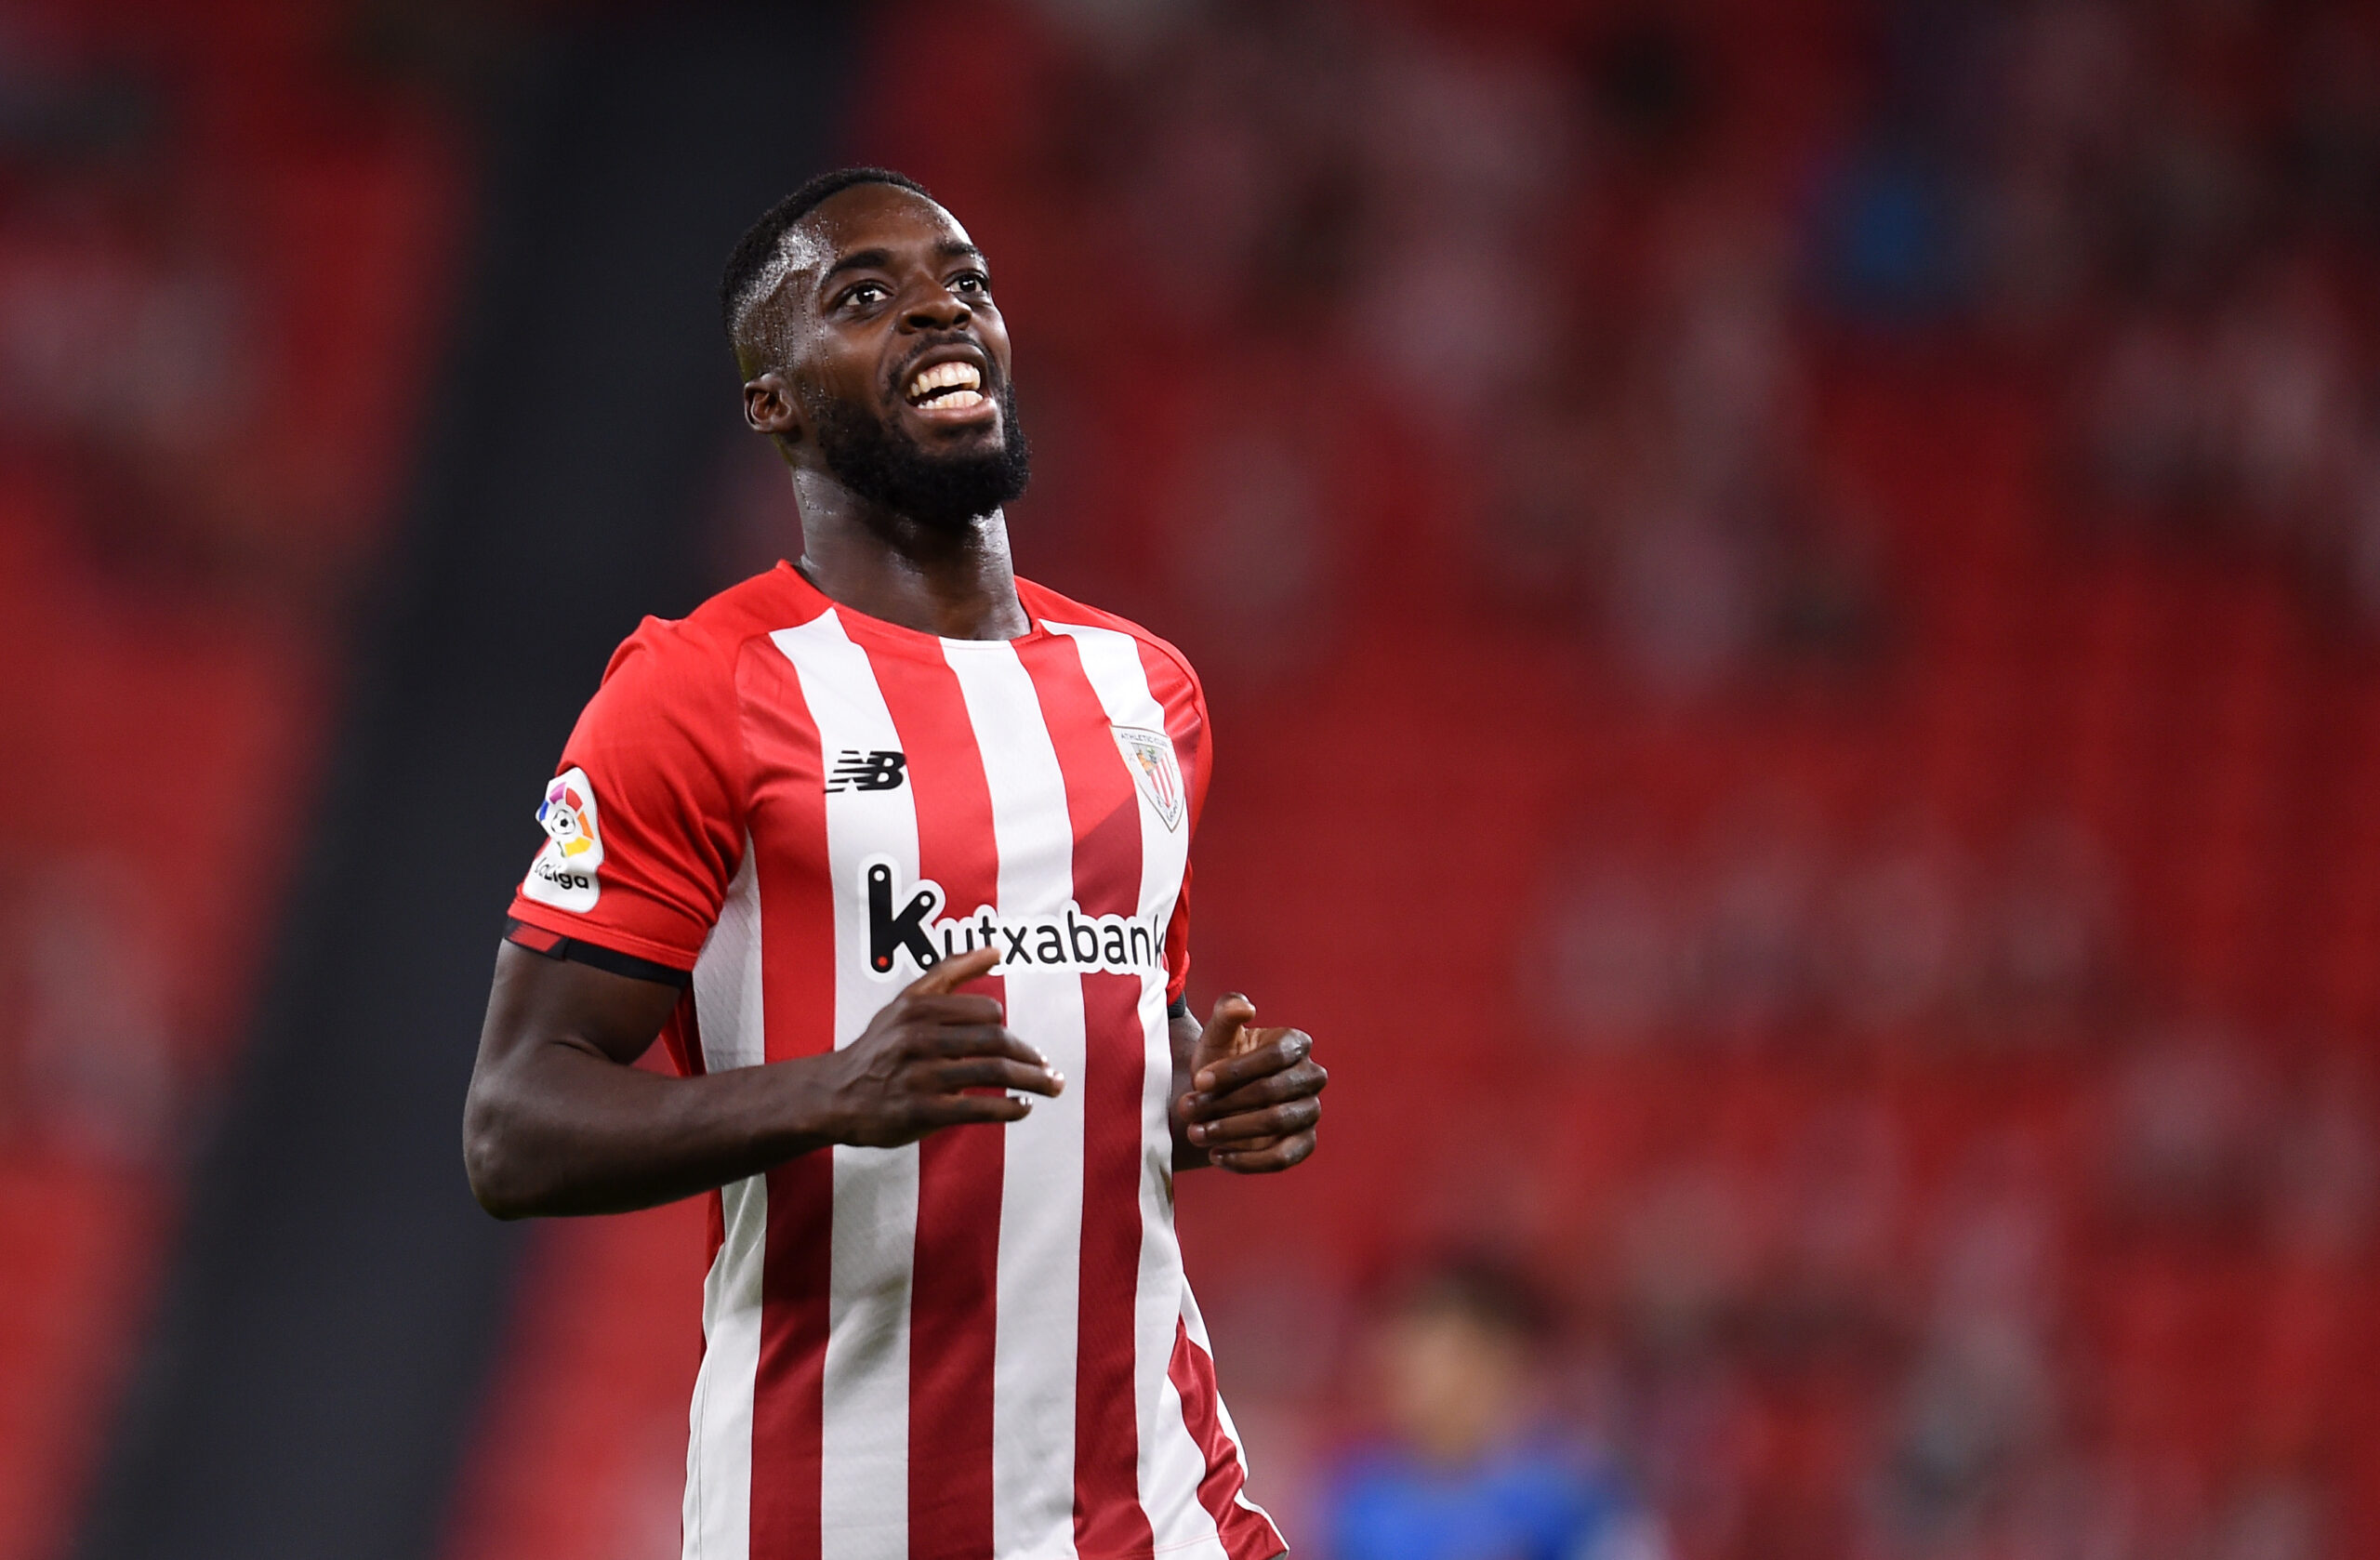 BILBAO, SPAIN - SEPTEMBER 11: Inaki Williams of Athletic Bilbao  reacts  during the LaLiga Santander match between Athletic Club and RCD Mallorca at San Mames Stadium on September 11, 2021 in Bilbao, Spain (Photo by Juan Manuel Serrano Arce/Getty Images)